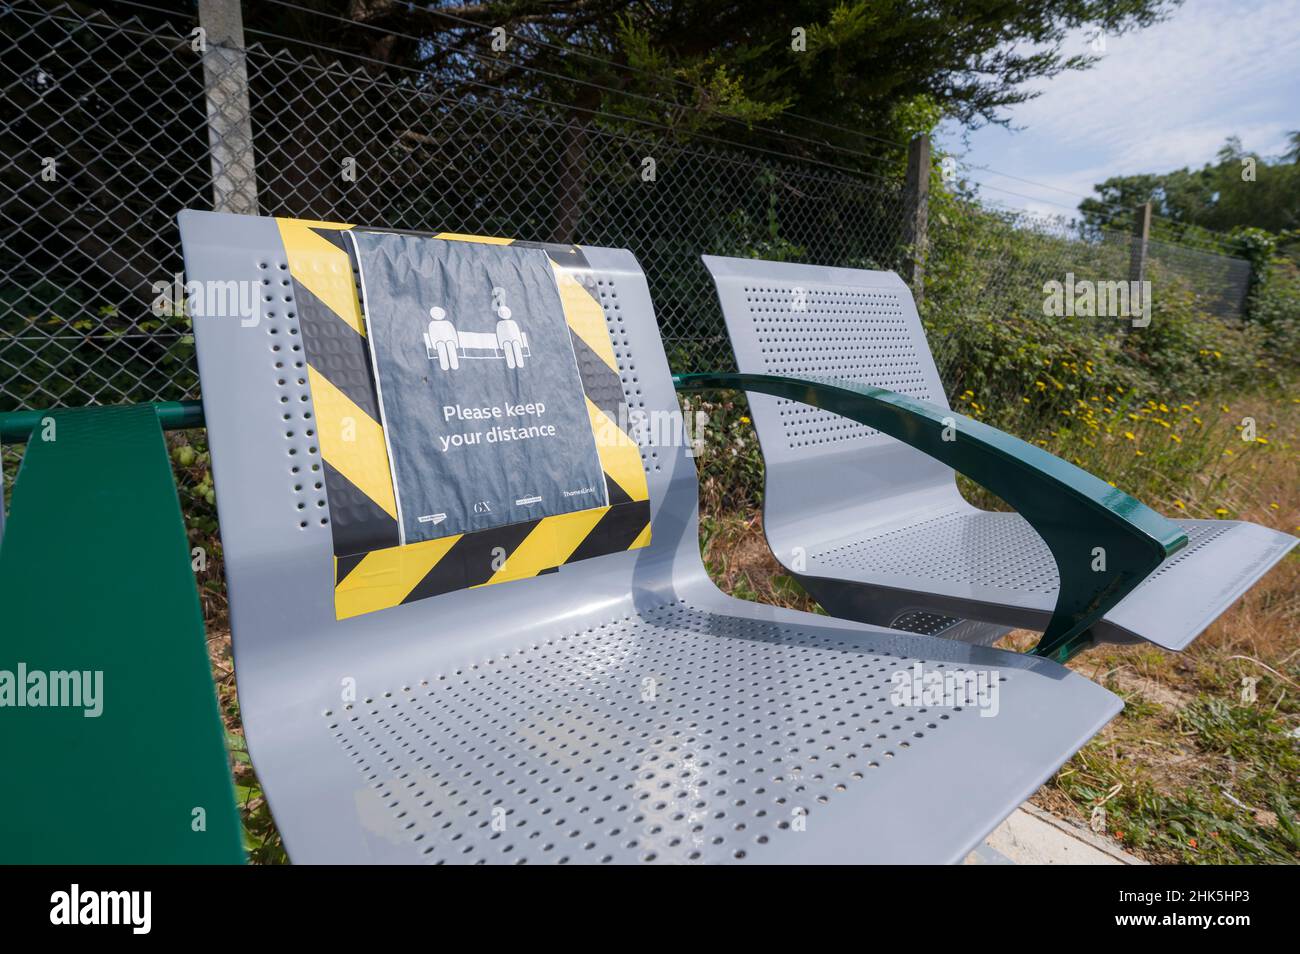 Social distancing sign on seating on a railway platform, during the coronavirus pandemic in June 2020, England, UK. Stock Photo